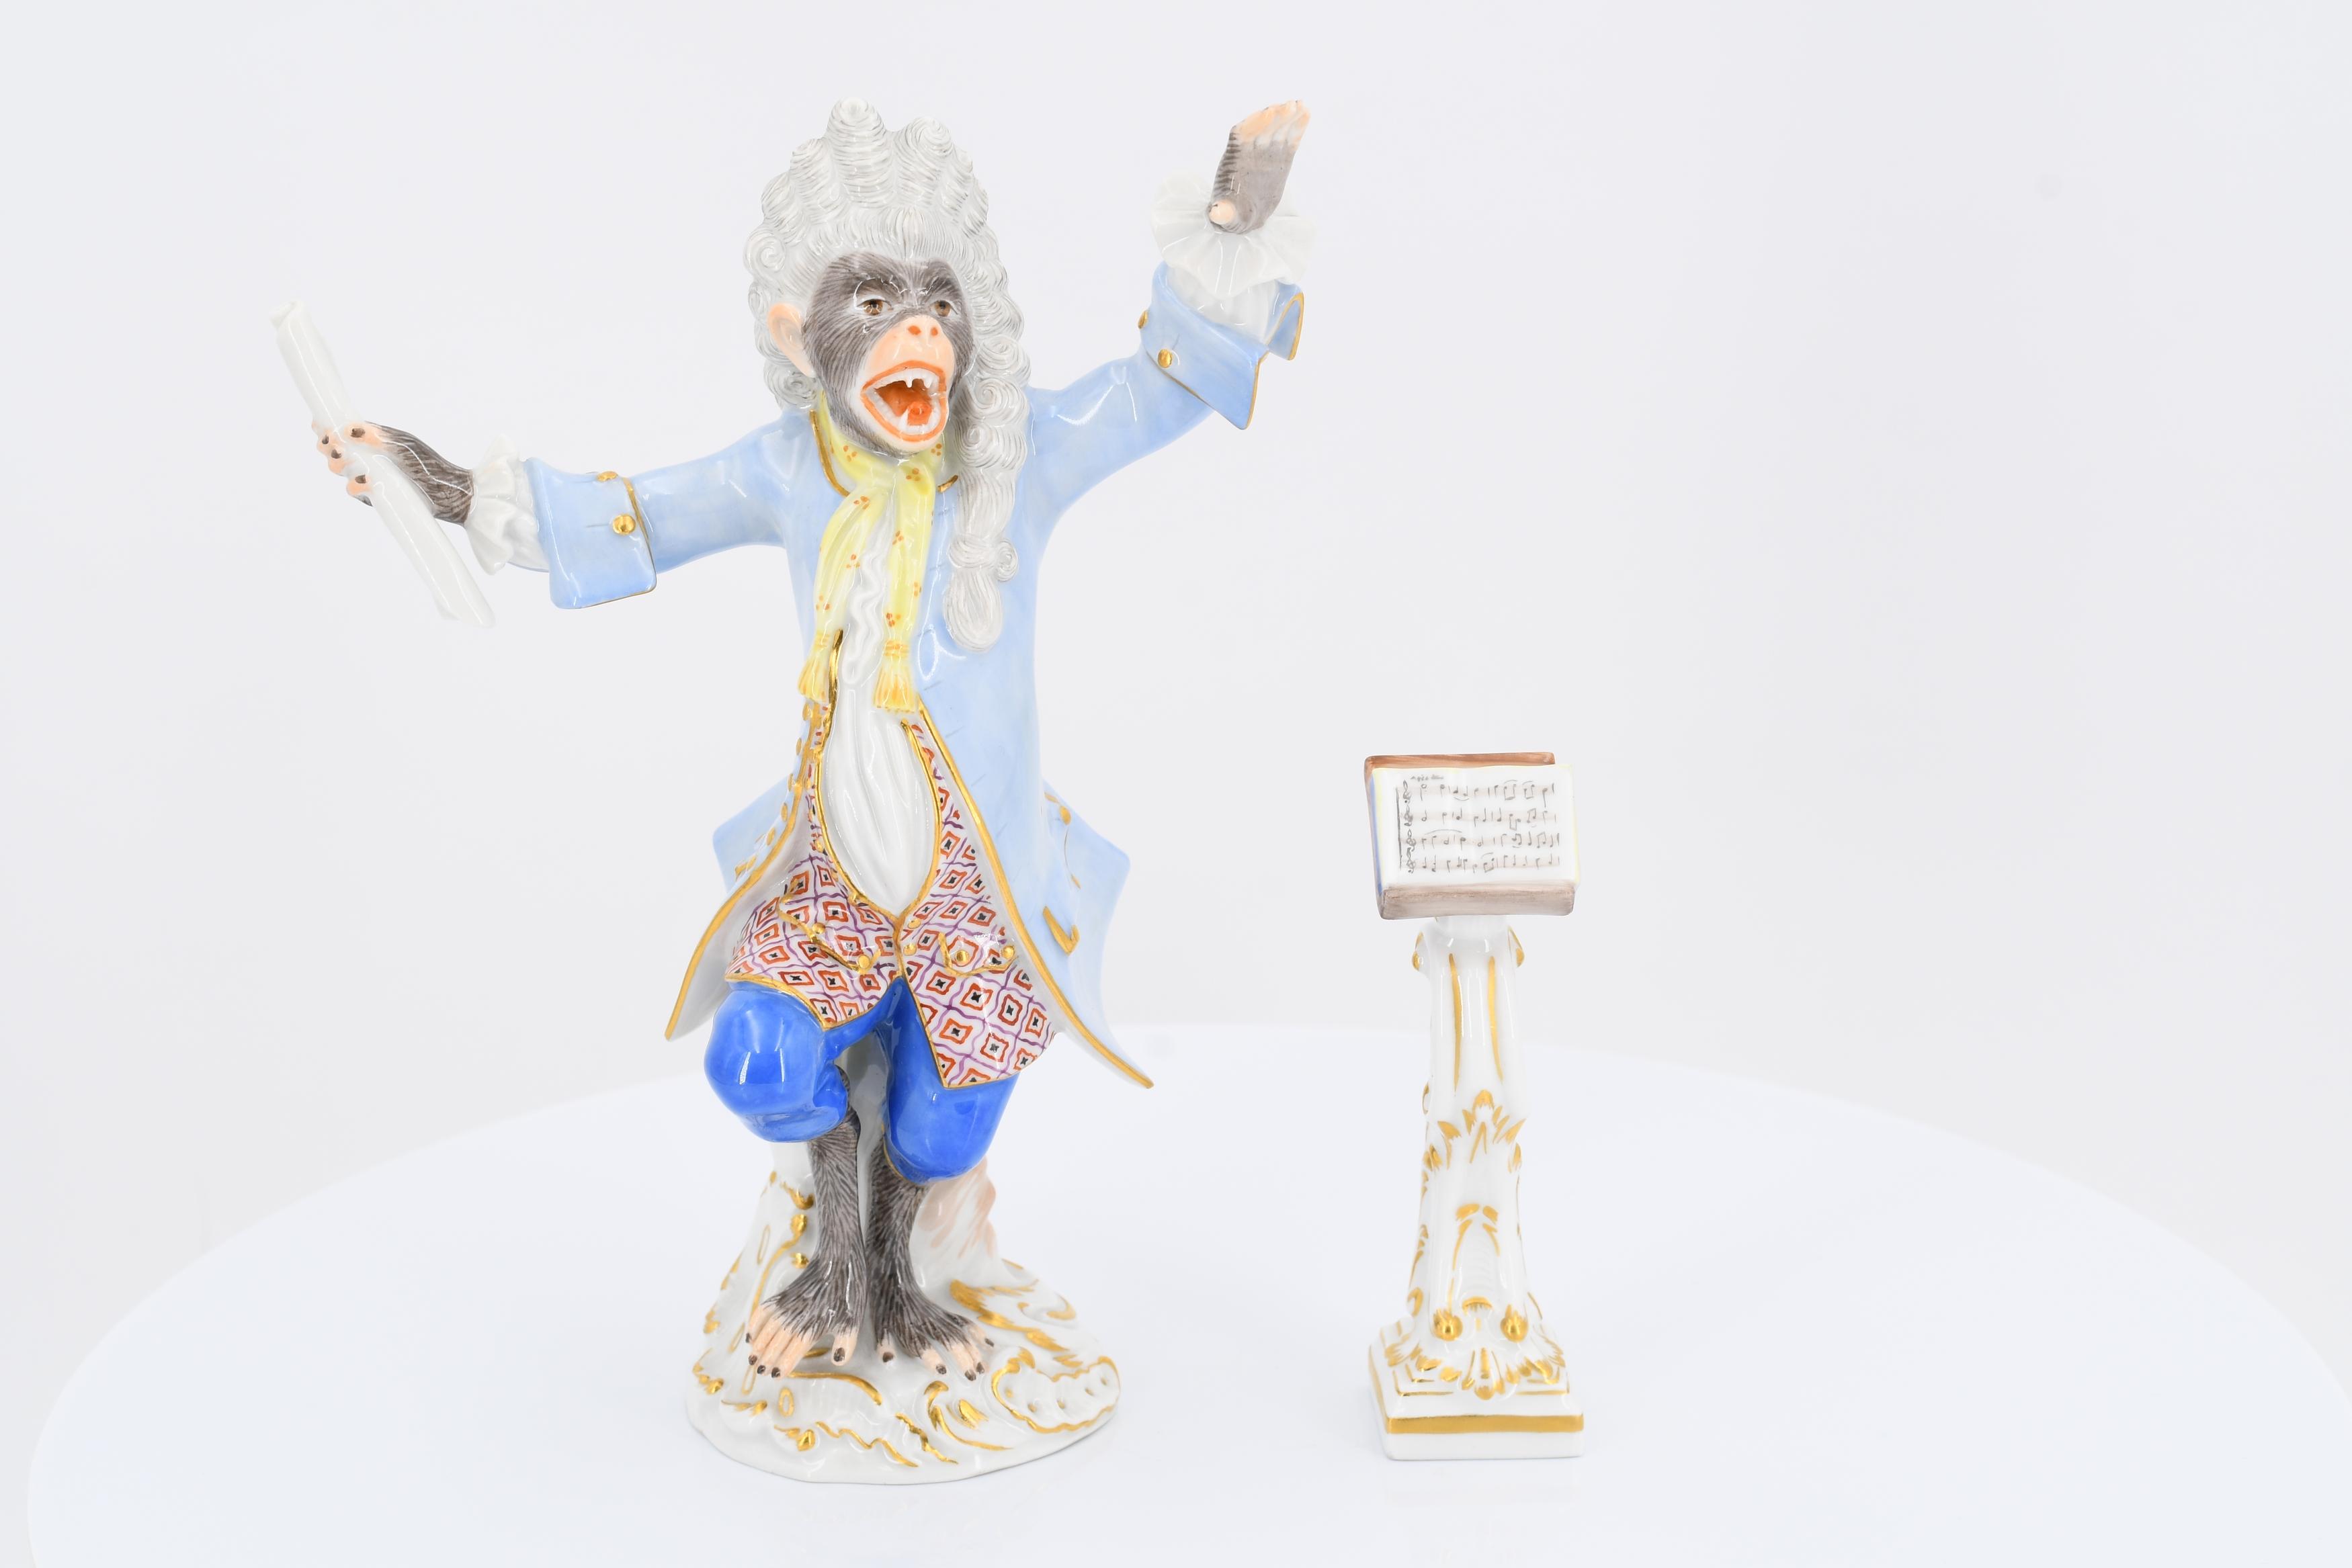 19 porcelain figurines and one music desk from the ape chapel - Image 17 of 27